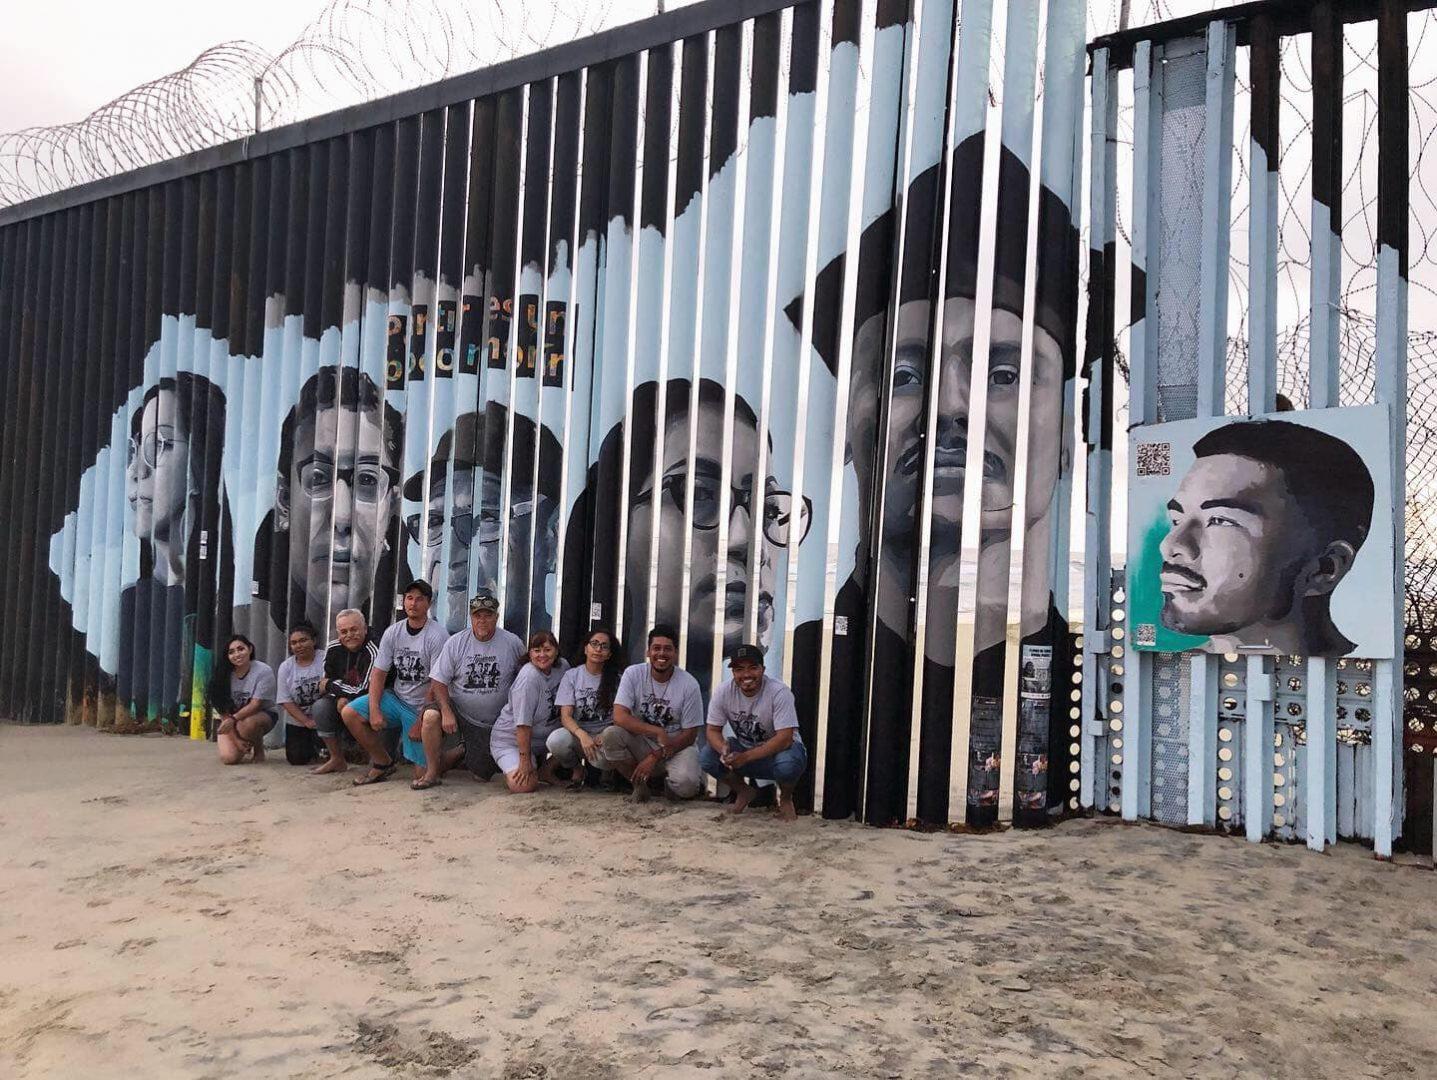 Volunteers+pose+for+a+photo+in+front+of+the+completed+mural+on+August+9%2C+2019%2C+at+Playas+de+Tijuana.+%28Courtesy+of+Lizbeth+De+La+Cruz+Santana%29